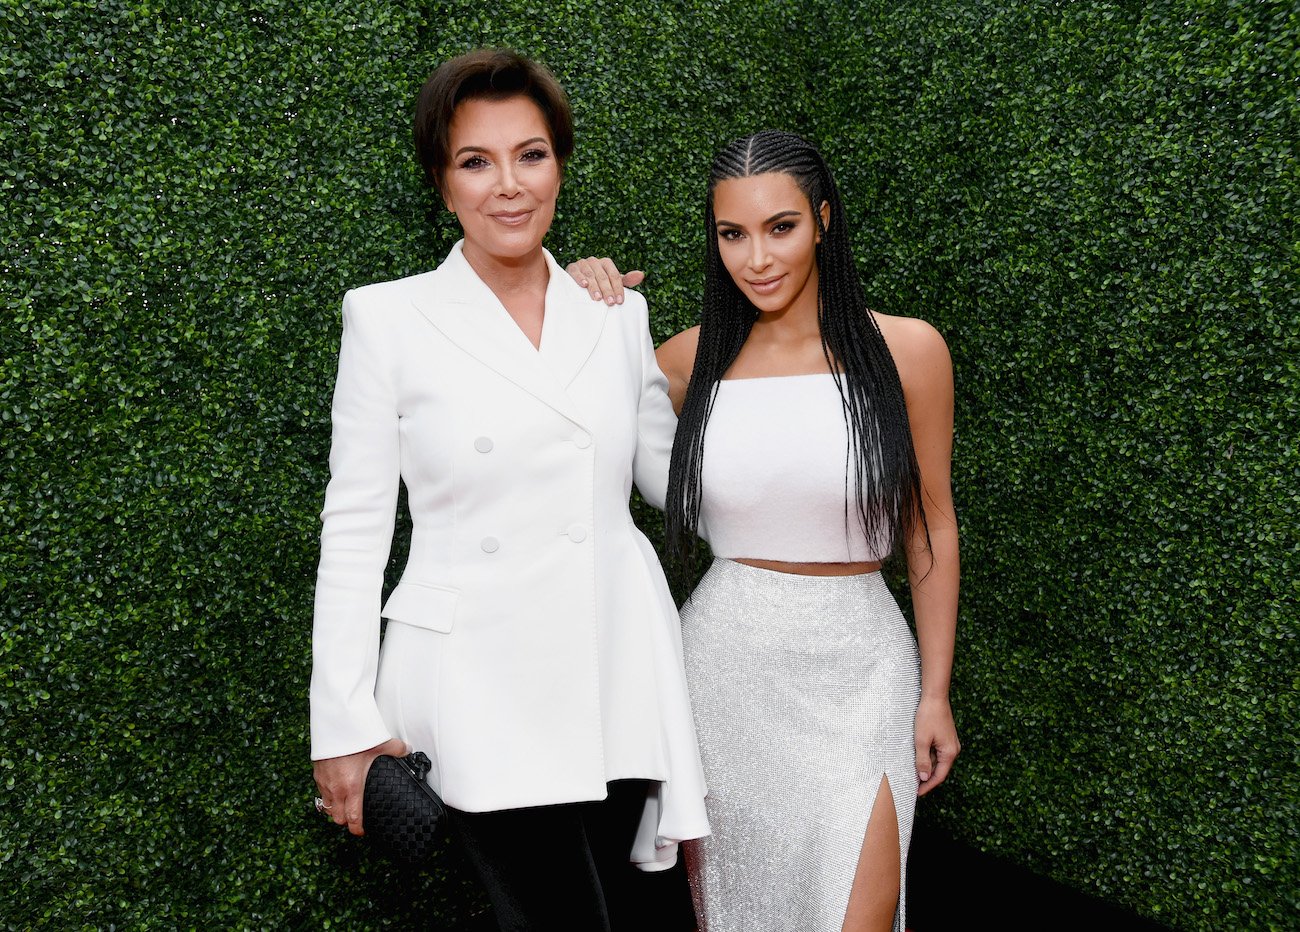 Kris Jenner and Kim Kardashian standing next to each other in white outfits and in front of a dark green background